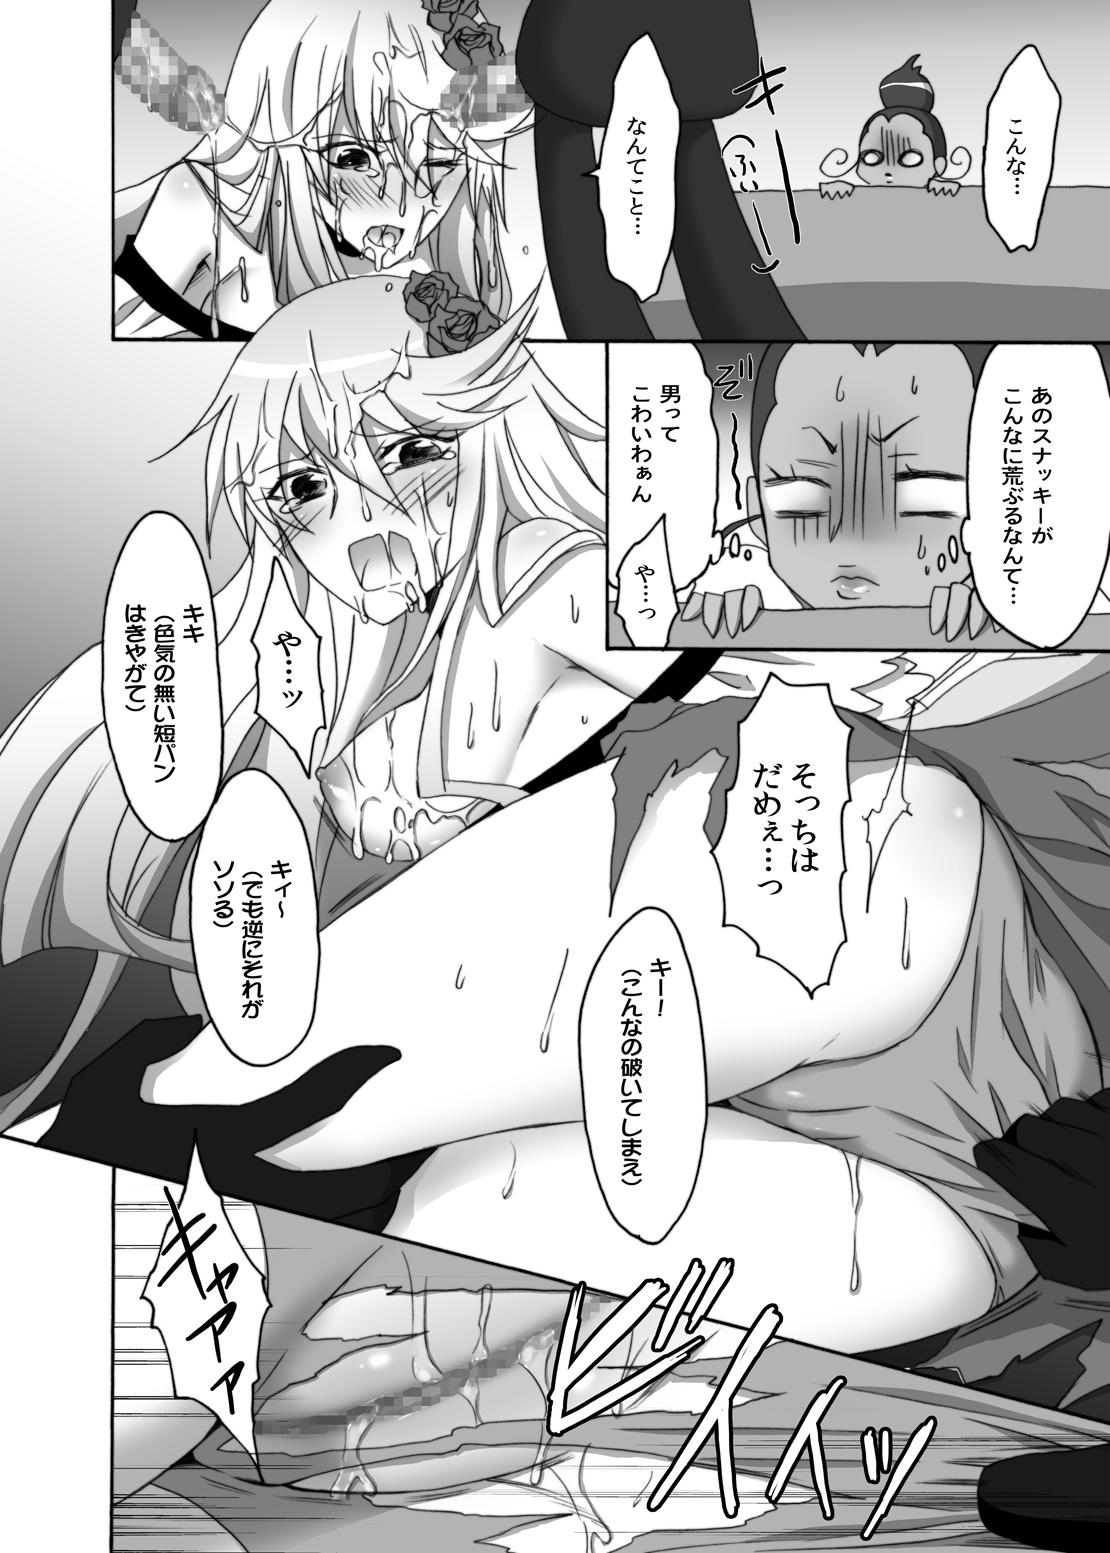 Pussy Sex Moonlight-san Suna Mamire - Heartcatch precure Phat - Page 11